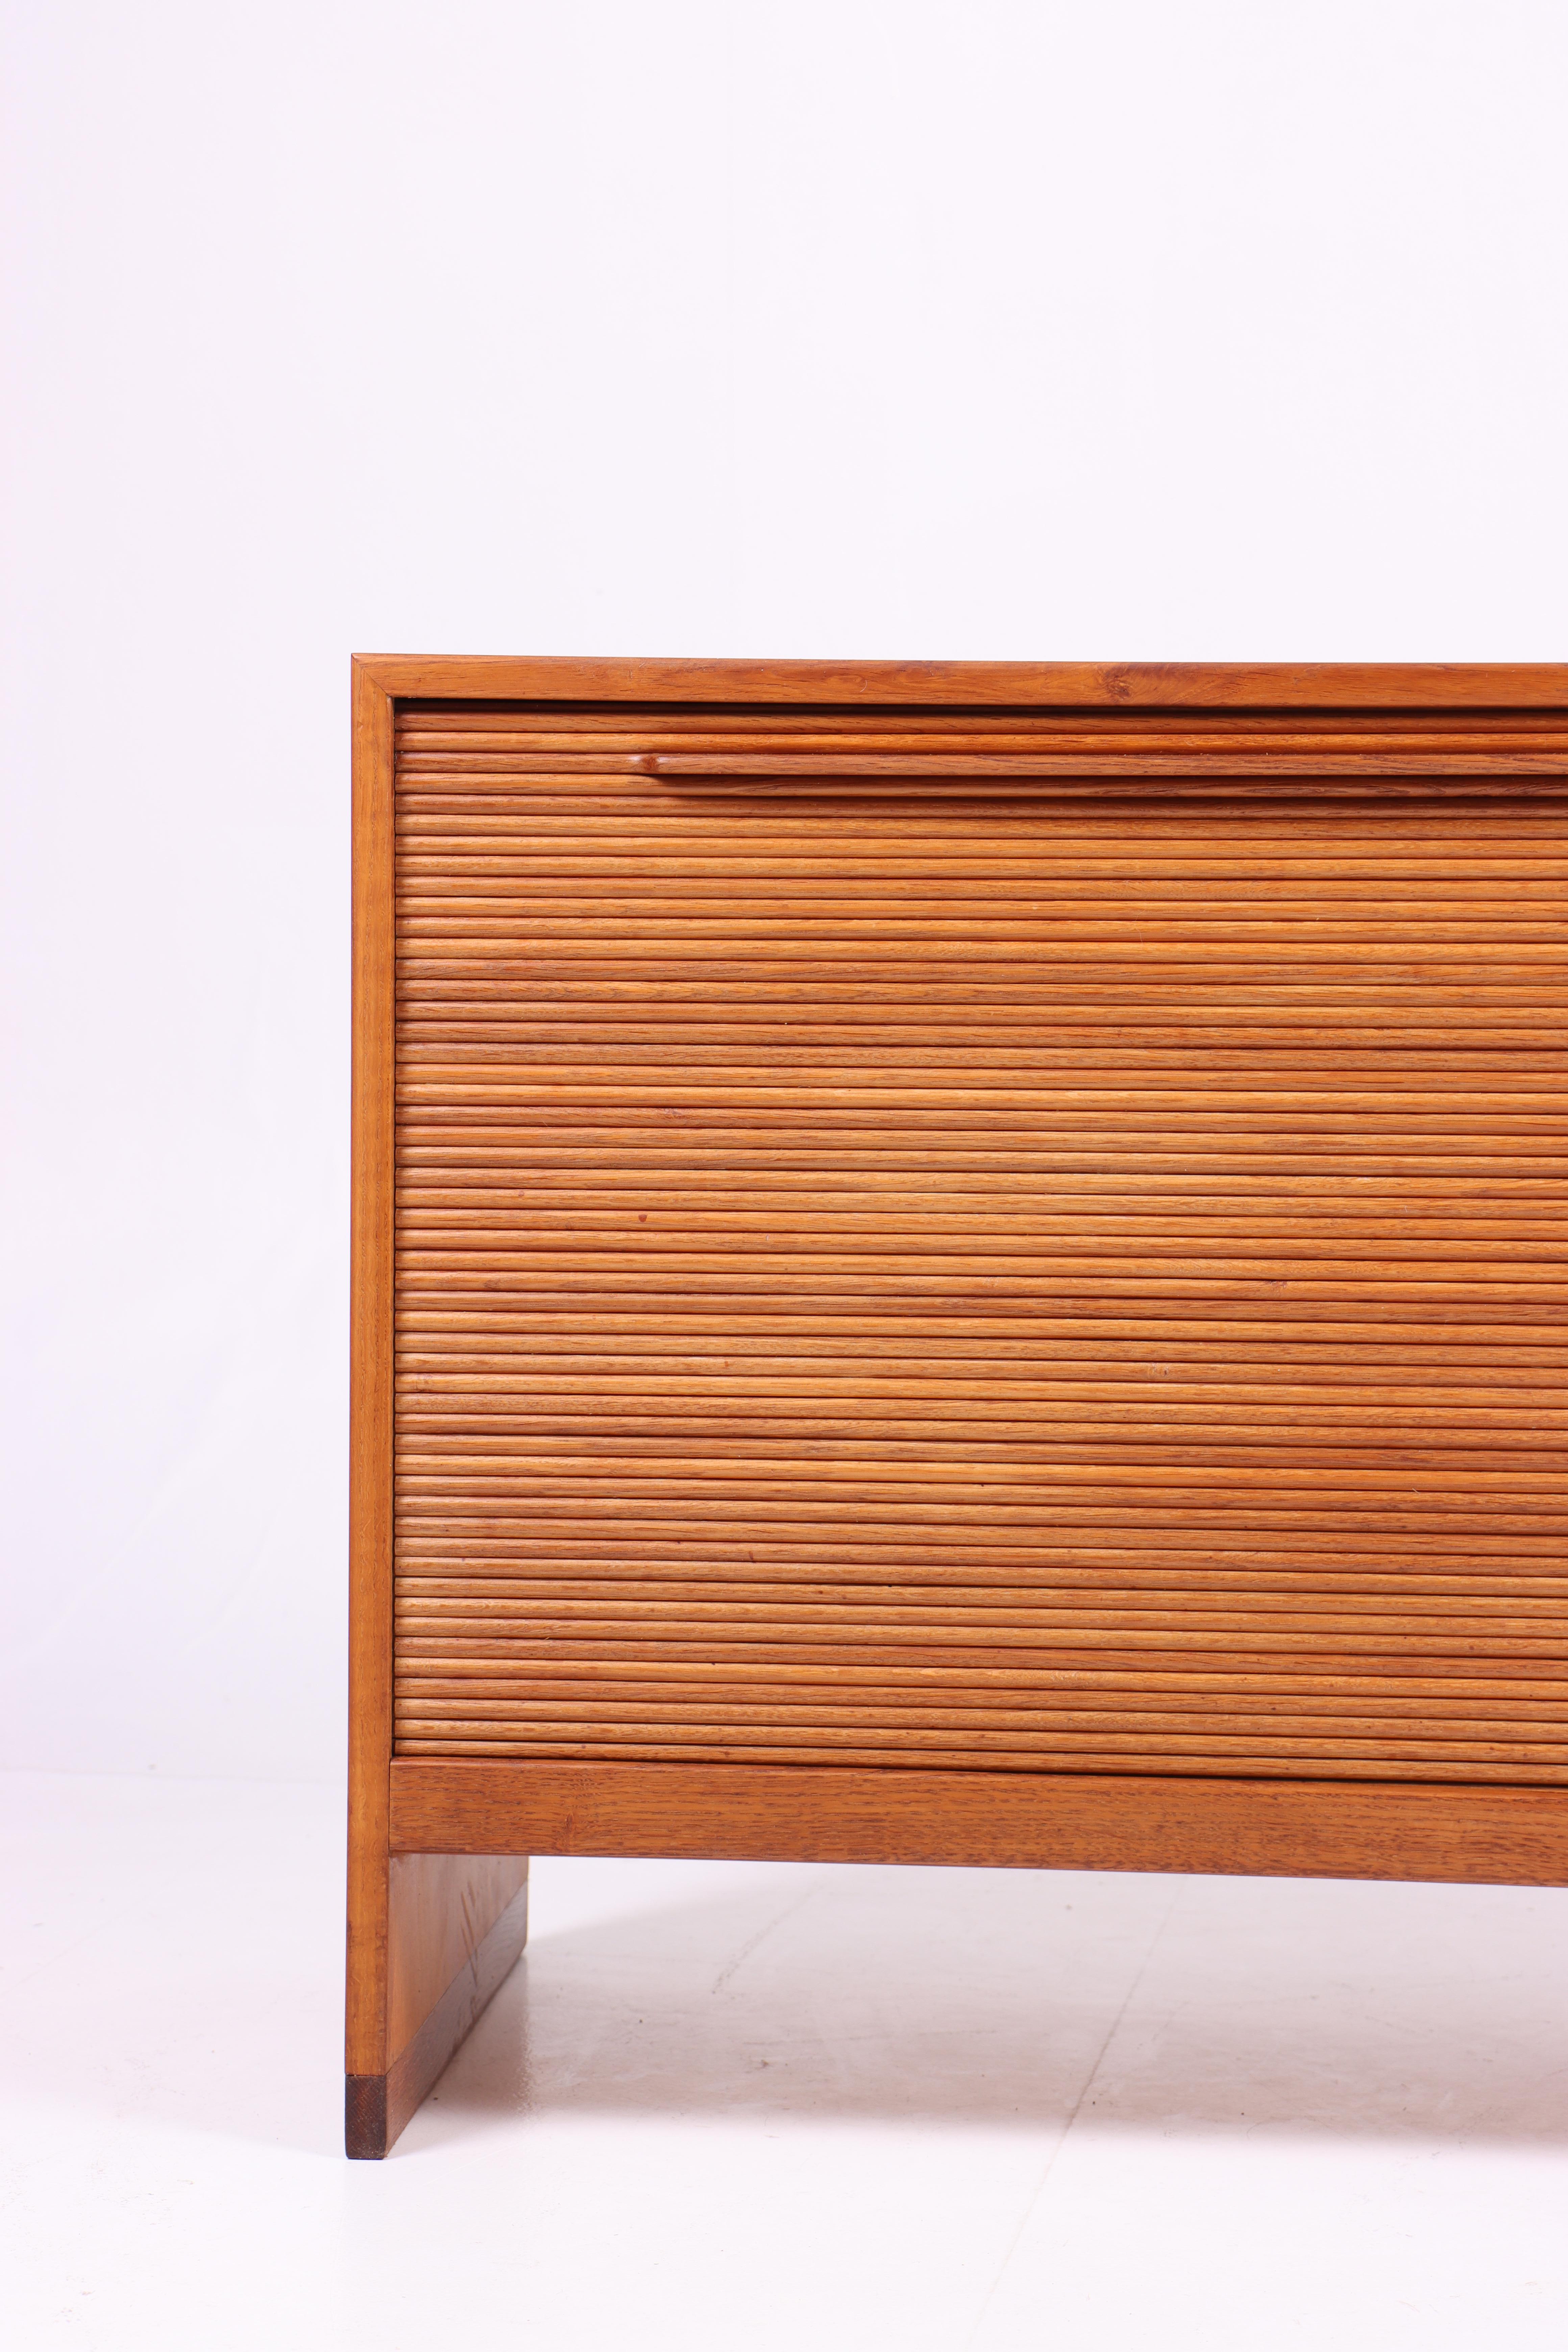 Rare cabinet in oak. Designed by Hans J Wegner for RY Moebler cabinetmakers in the late 1950s.